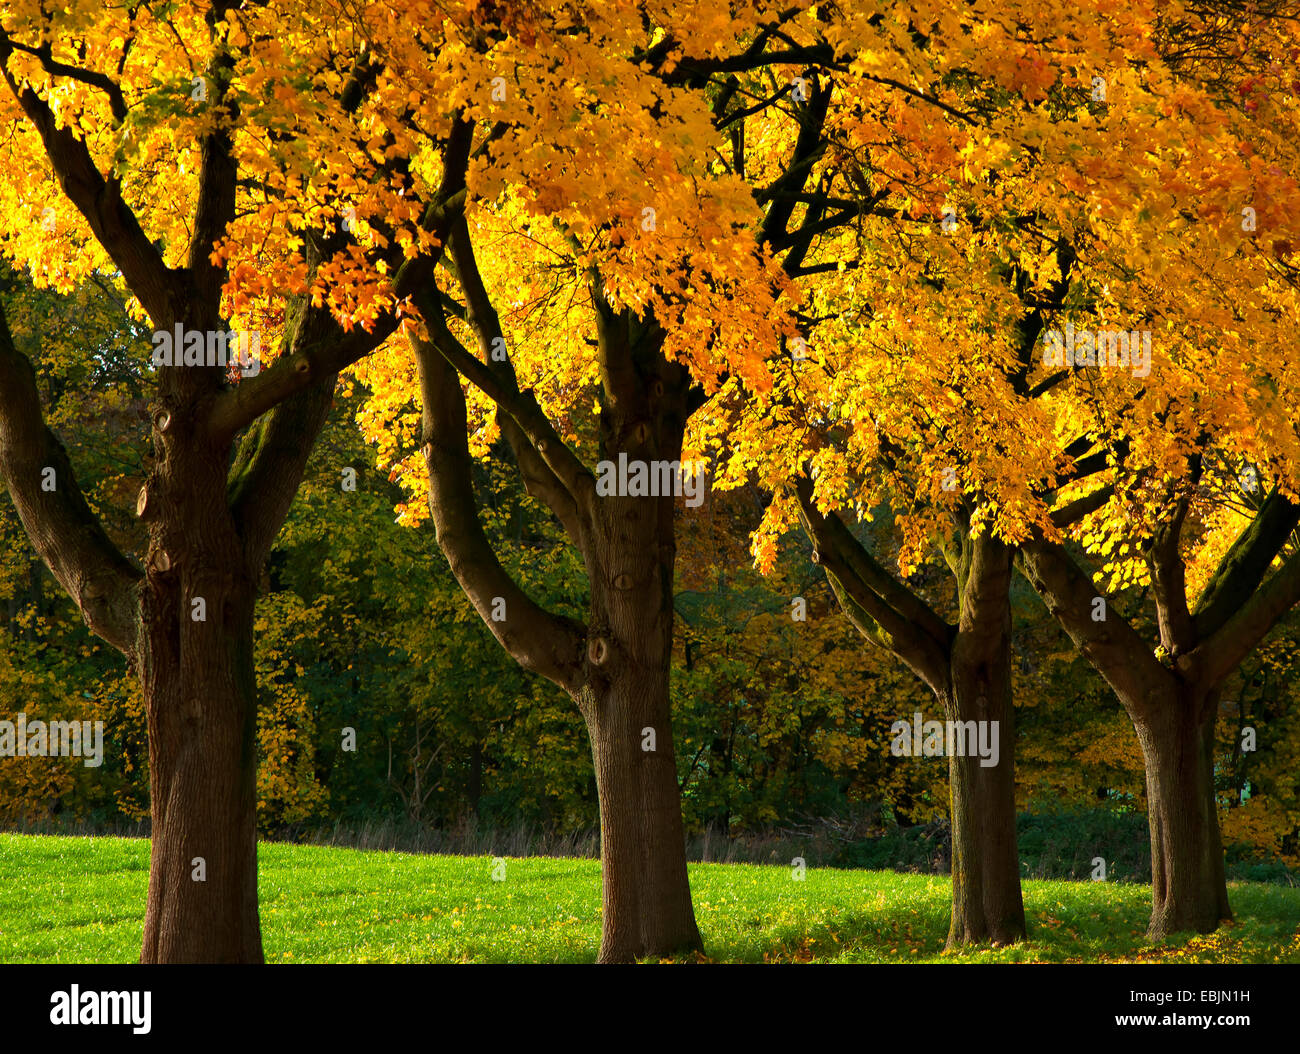 Norway maple (Acer platanoides), maples in autumn at a street boarder, Germany, North Rhine-Westphalia Stock Photo